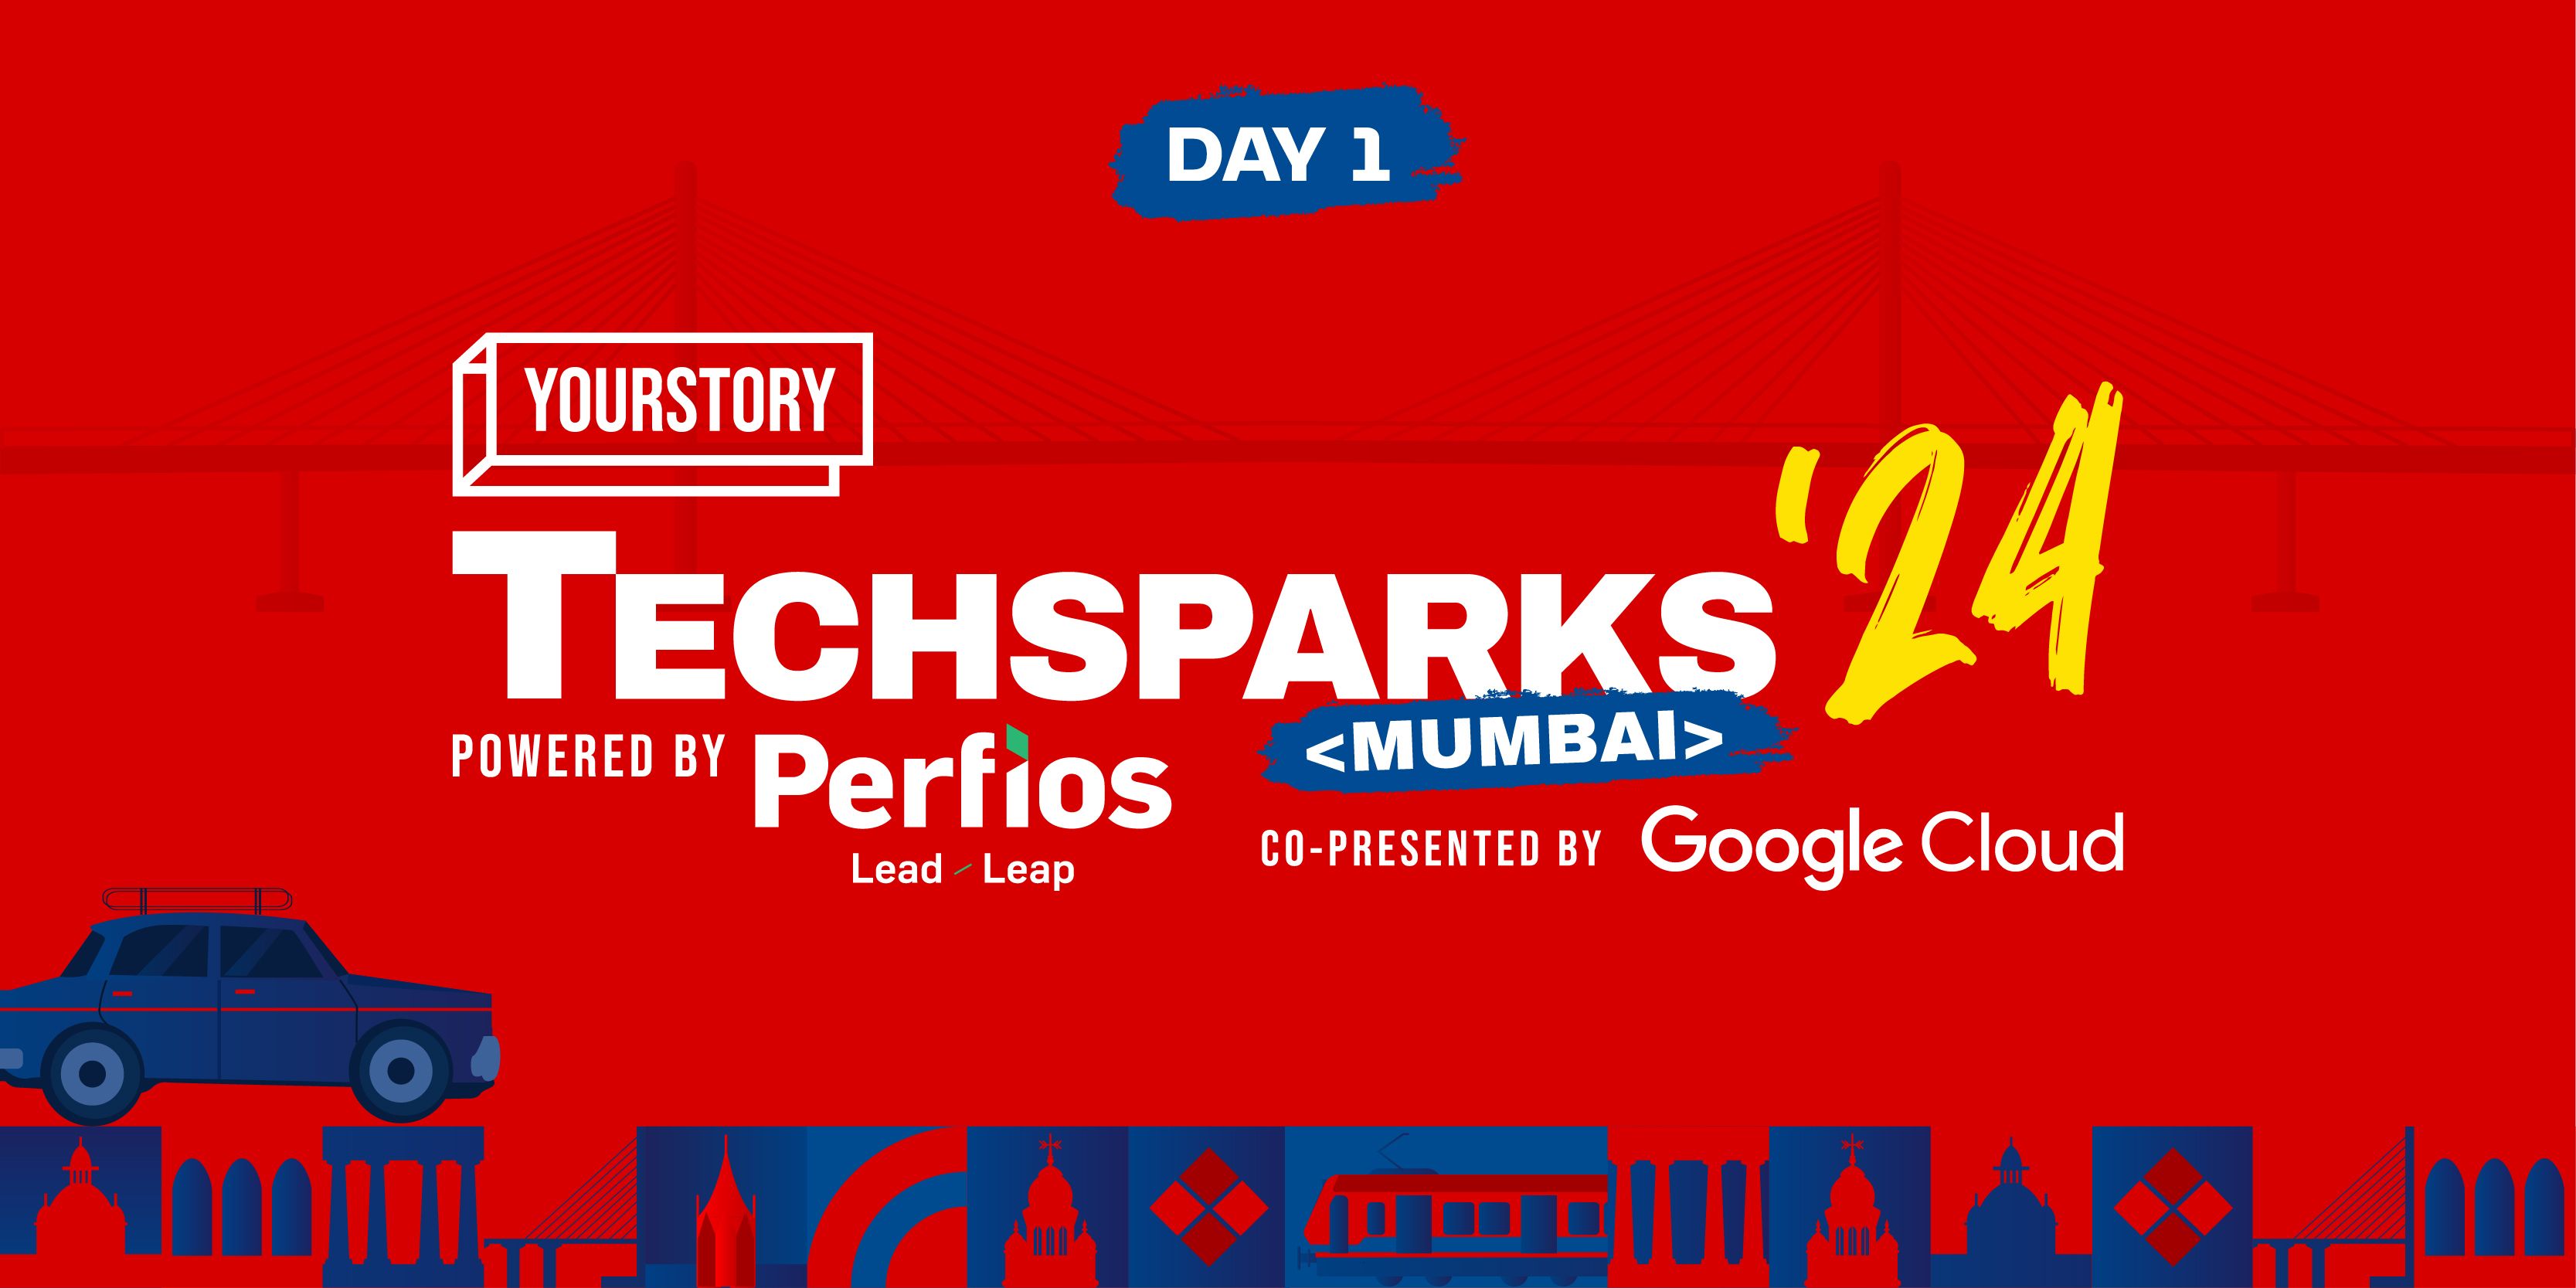 Ready for the sparks, Mumbai? Here’s what to expect on the Day 1 of TechSparks 2024